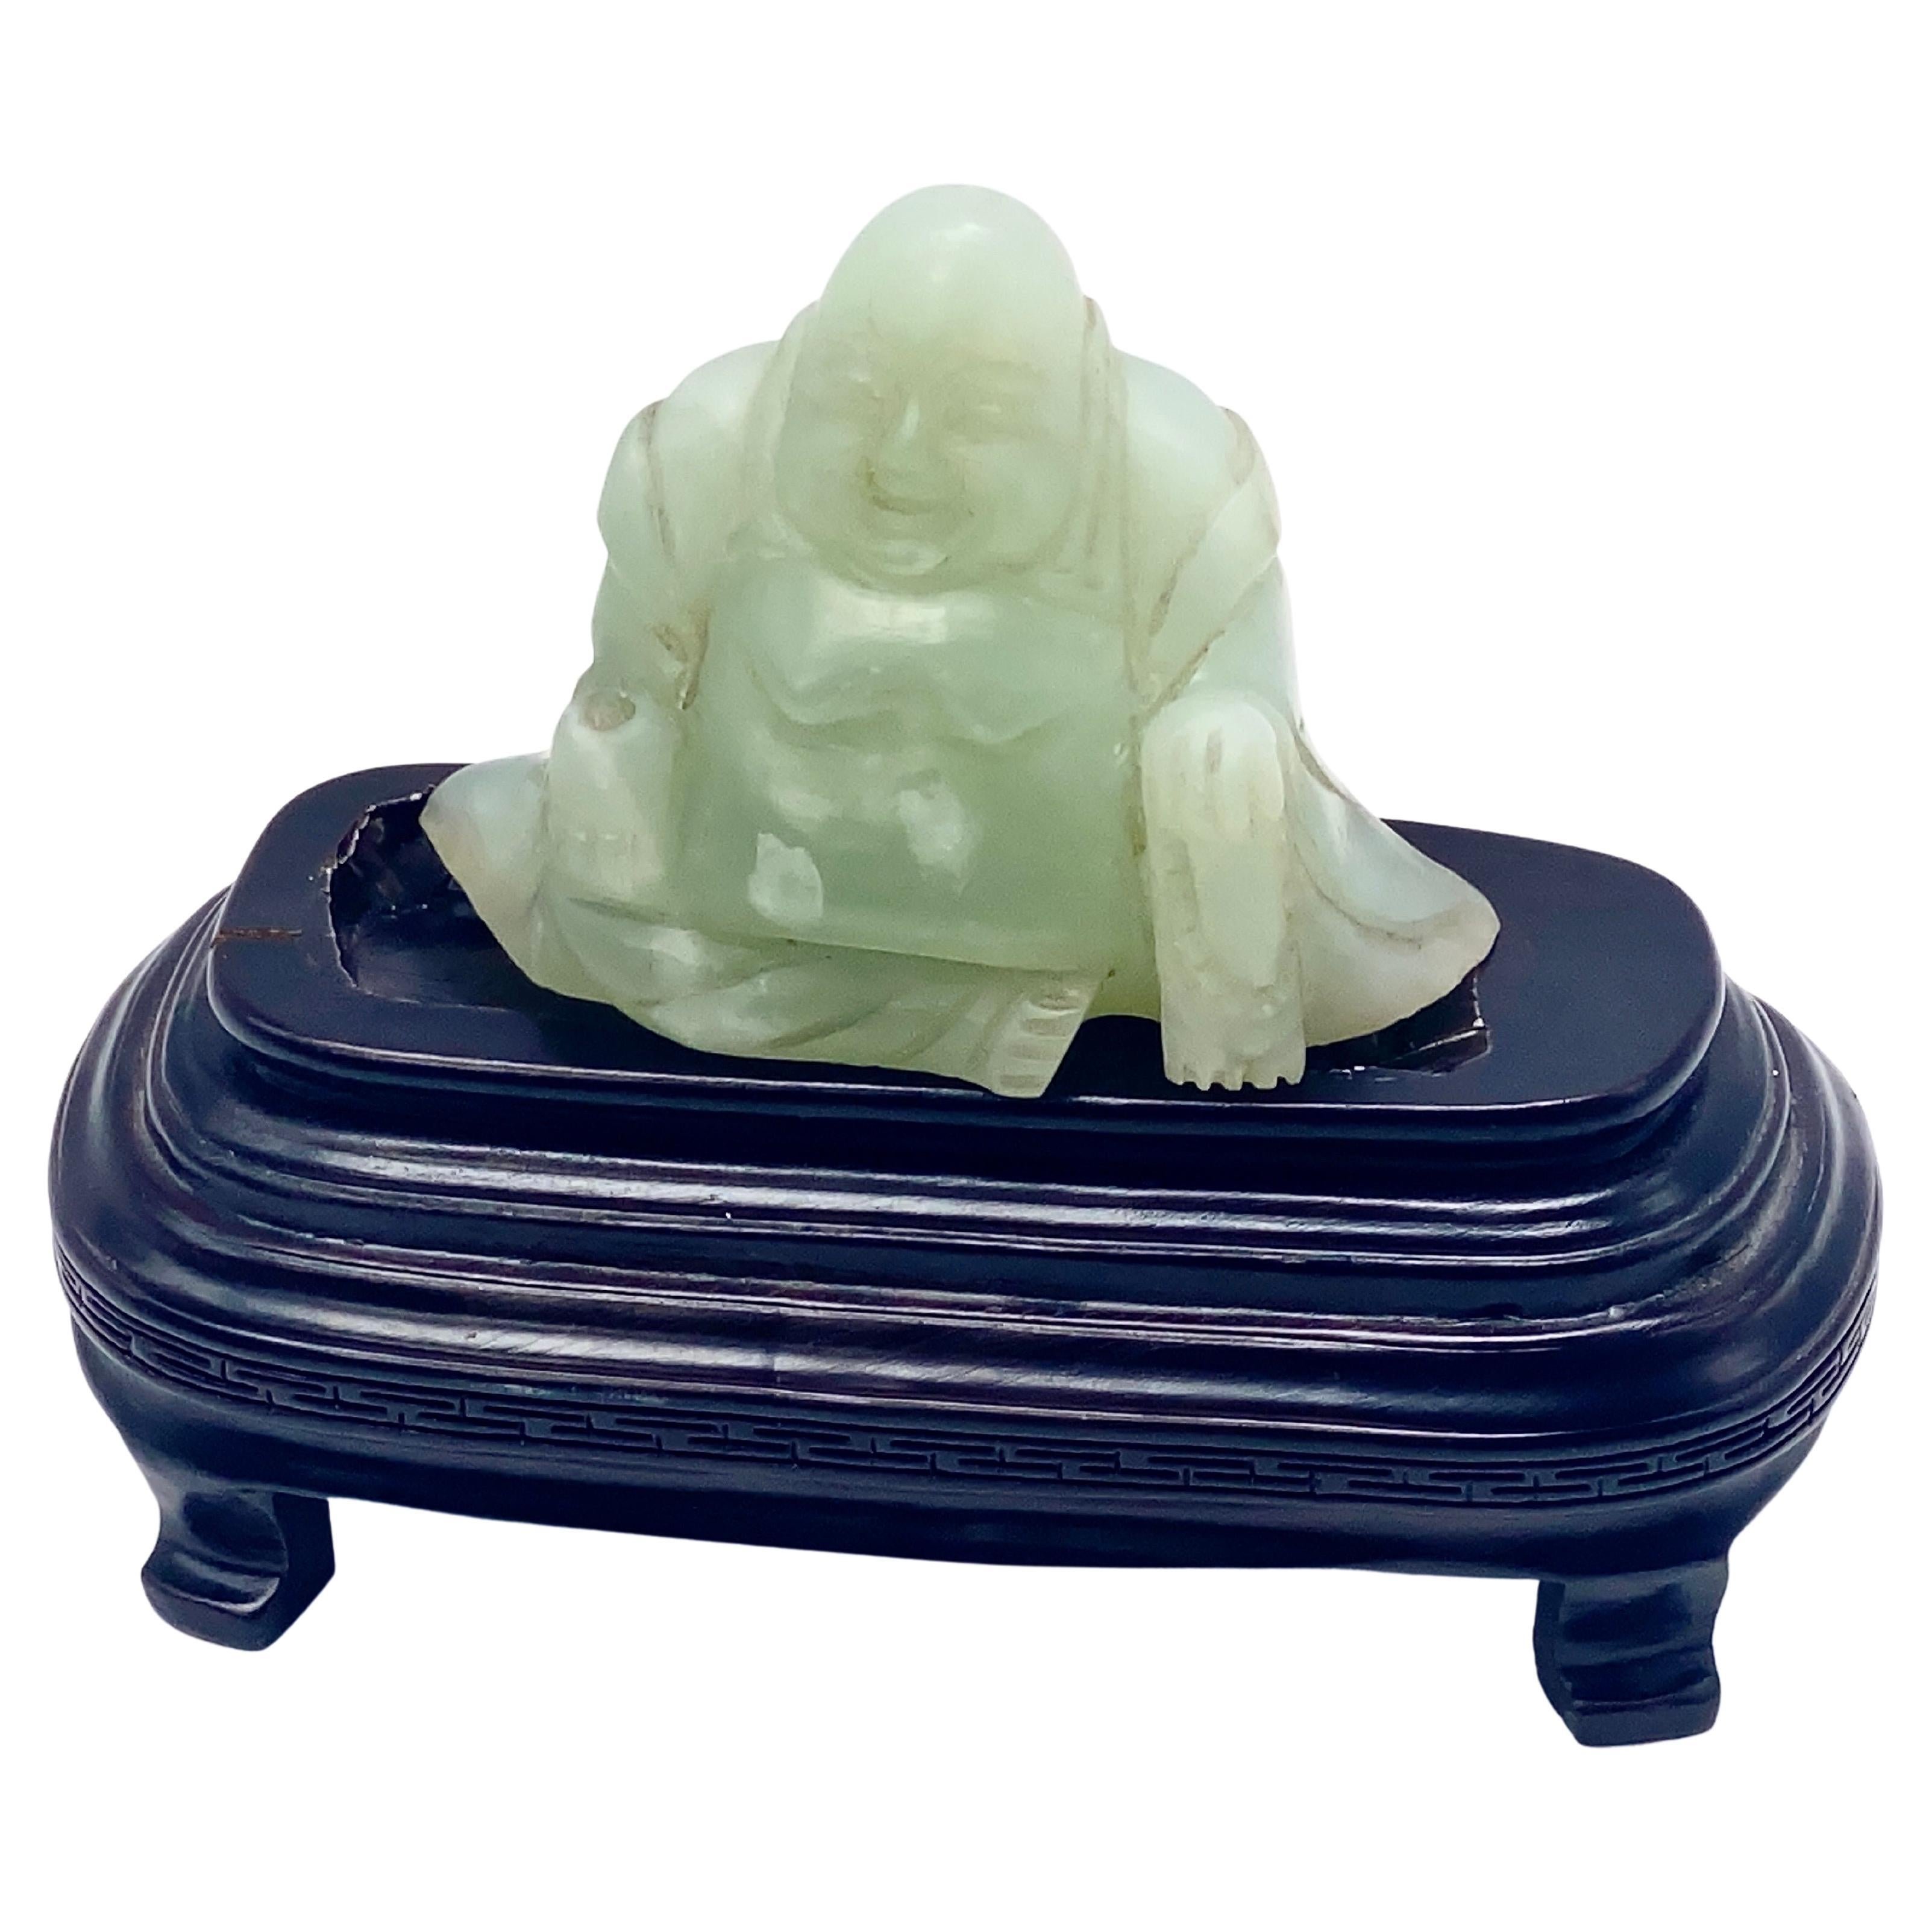 Chinese Carved Jade Figural Sculpture of Laughing Buddha, Budai, 20th Century For Sale